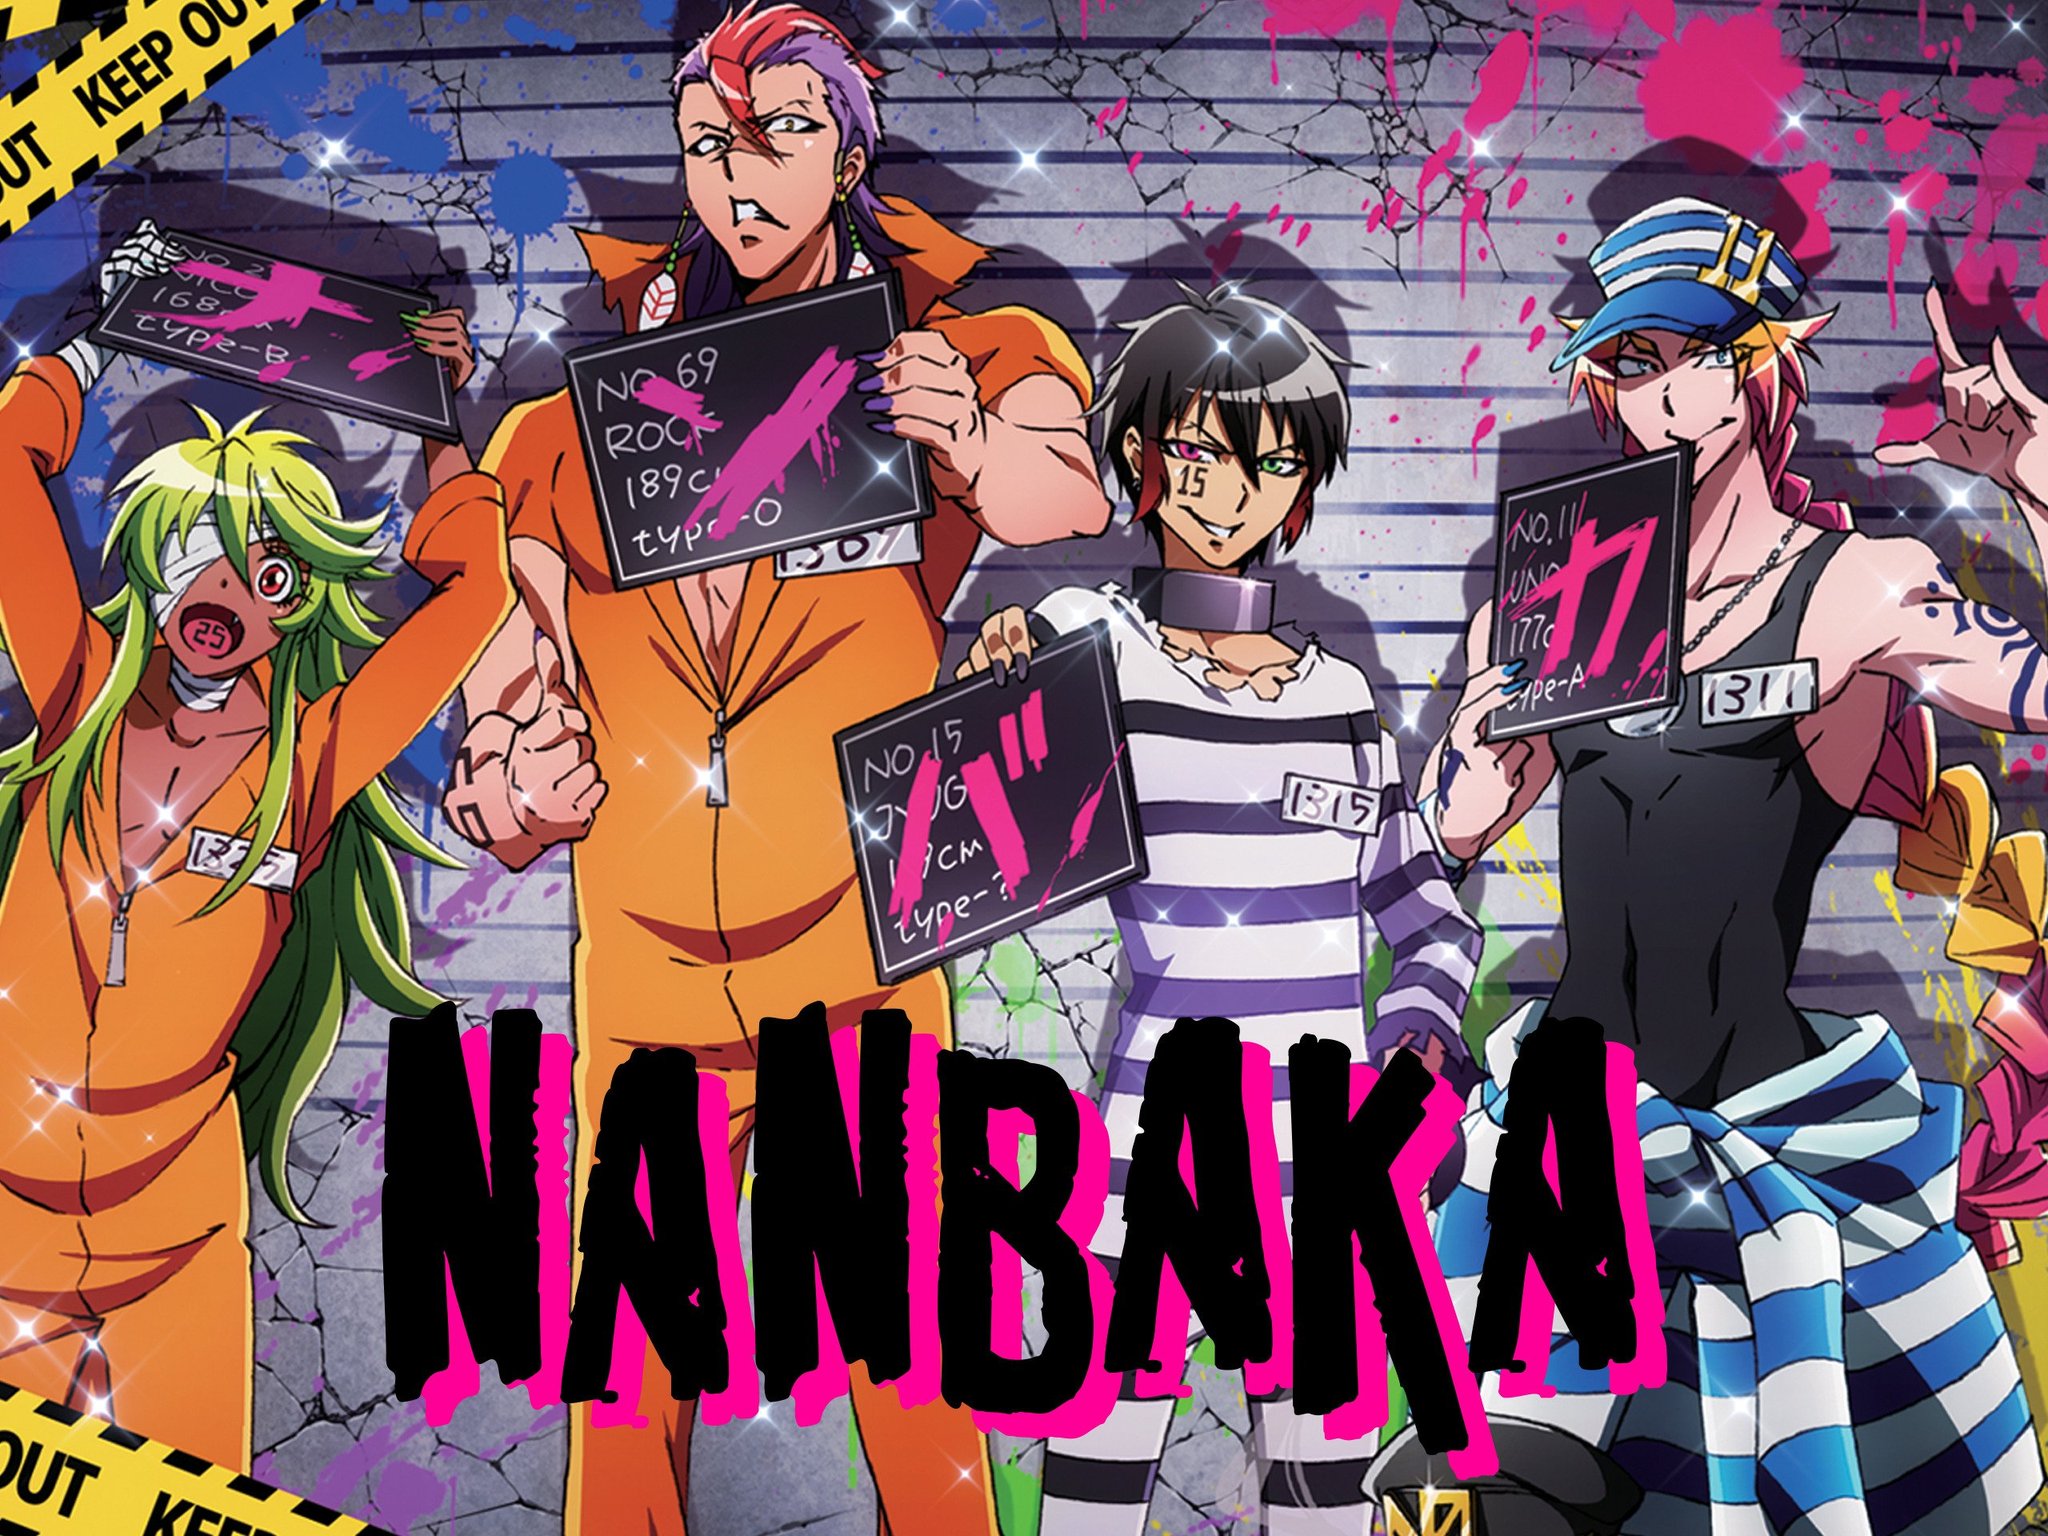 Honeyso on nanbaka have several lgbt characters a wild and colorful fun animemanga with darker moments httpstcohtfndlhdet